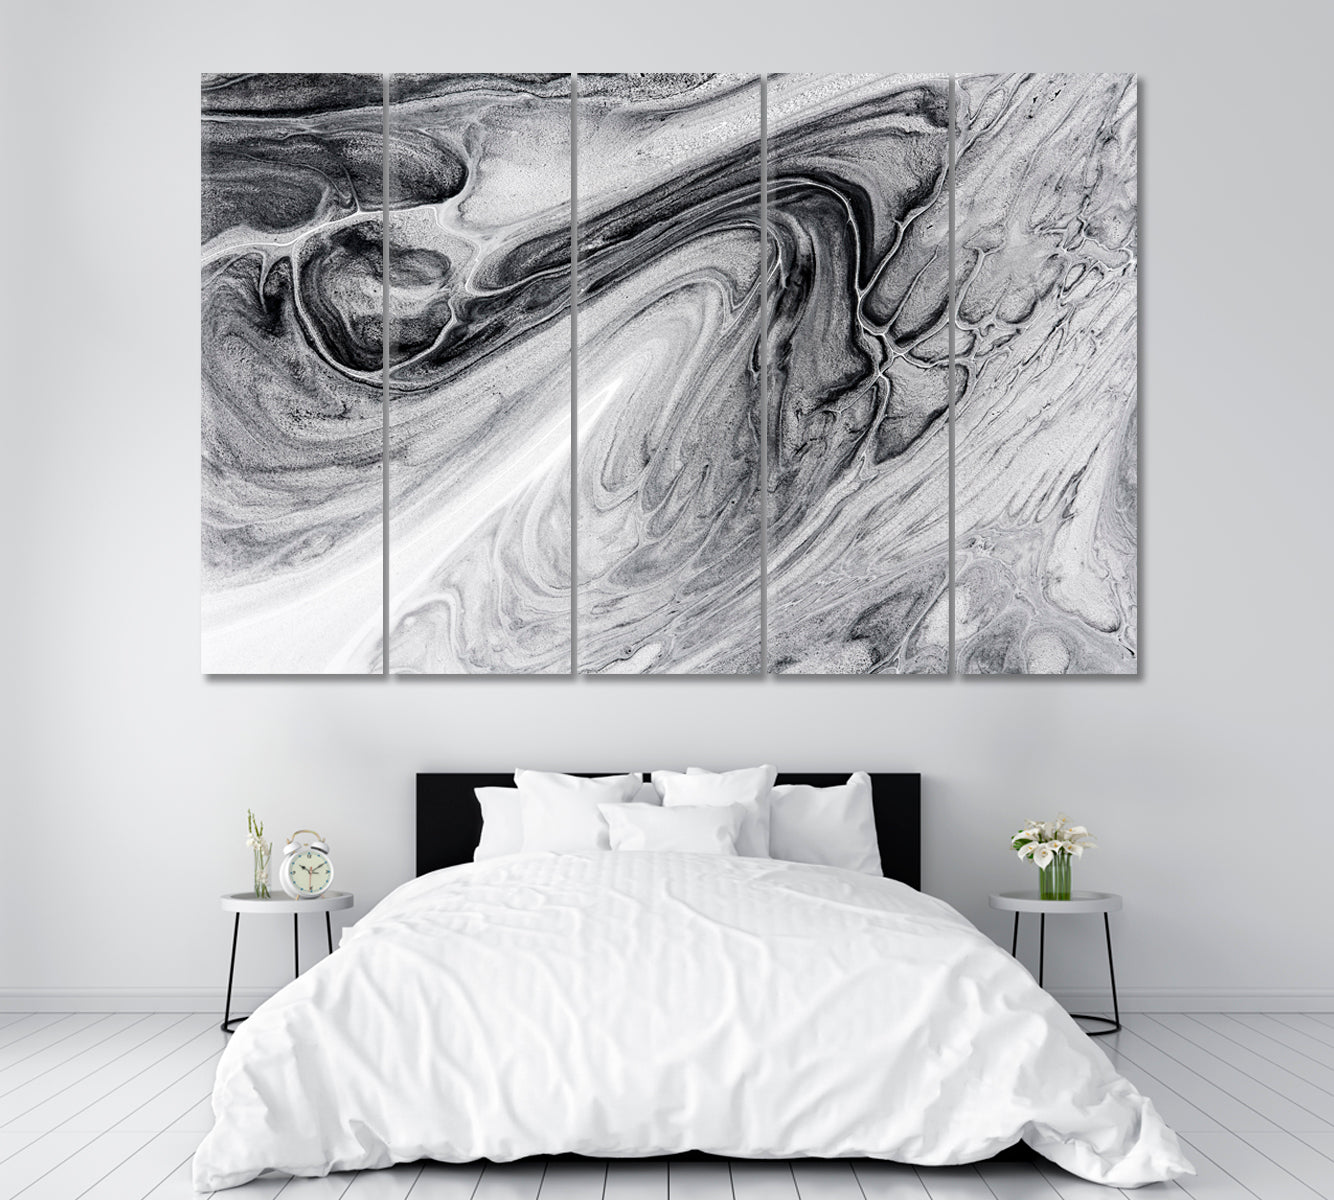 Abstract Black and White Marble Pattern Canvas Print ArtLexy 5 Panels 36"x24" inches 